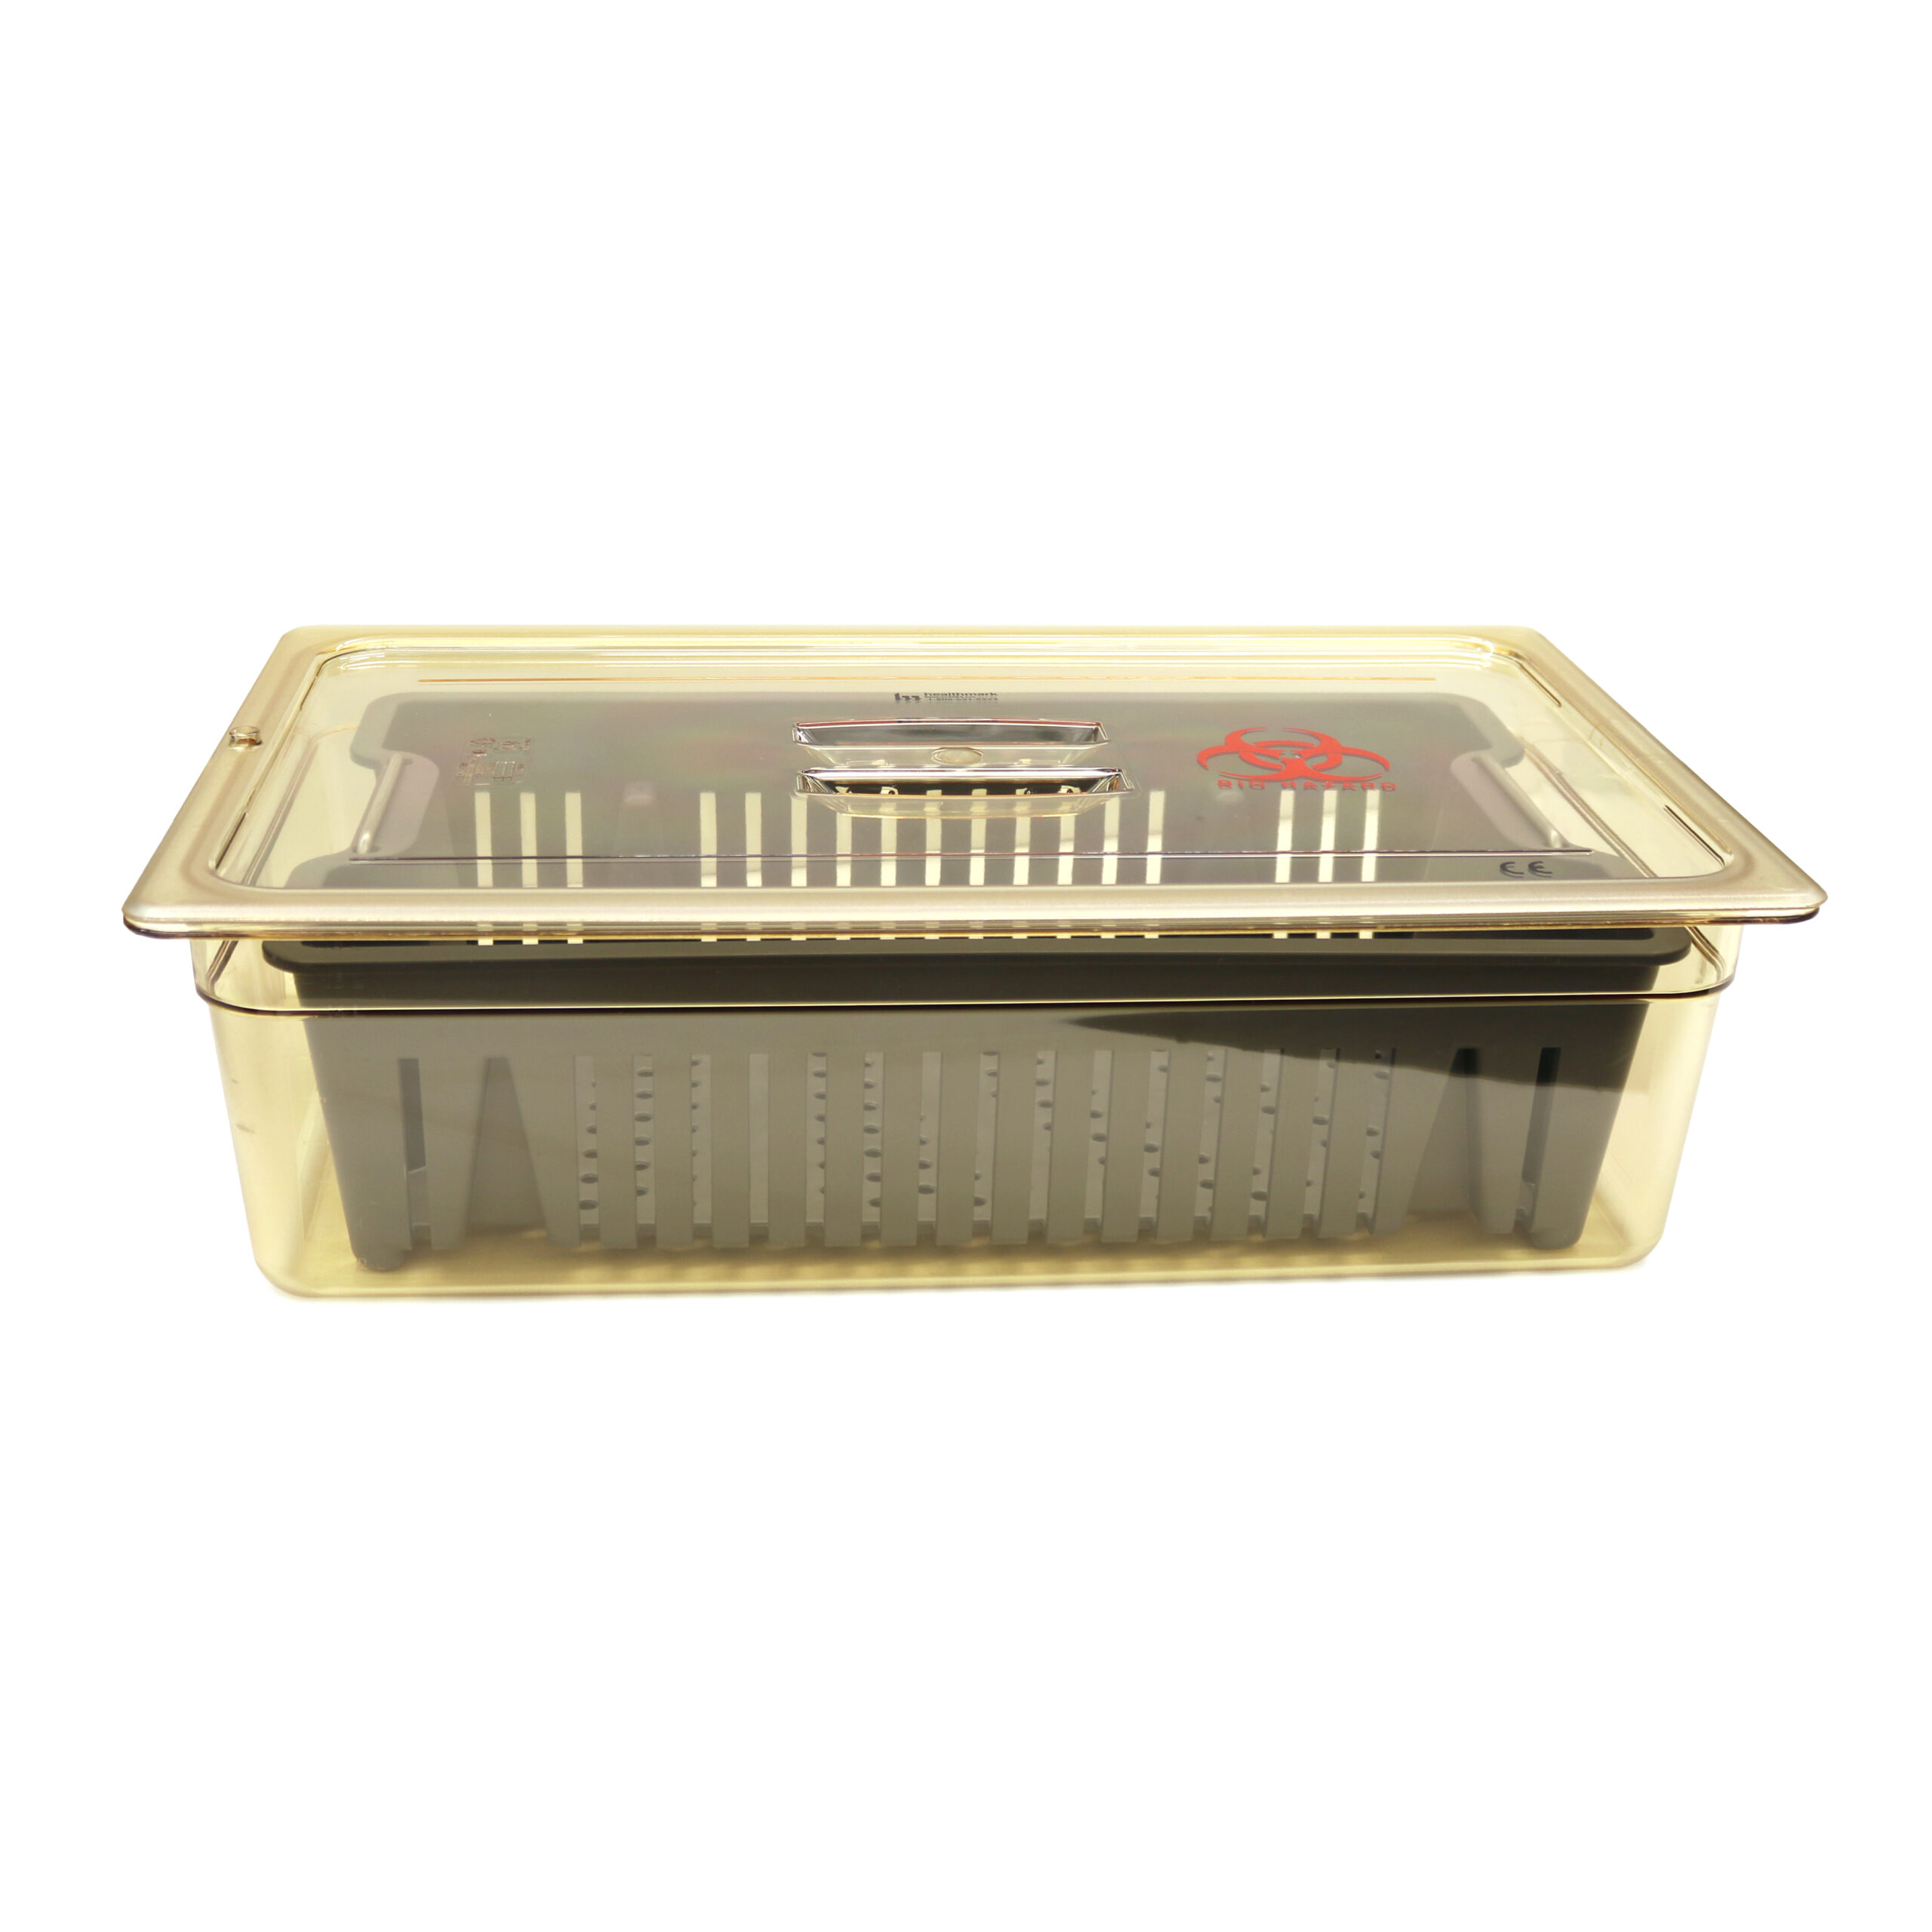 Storage Products - Long Storage Tray - Healthmark Industries